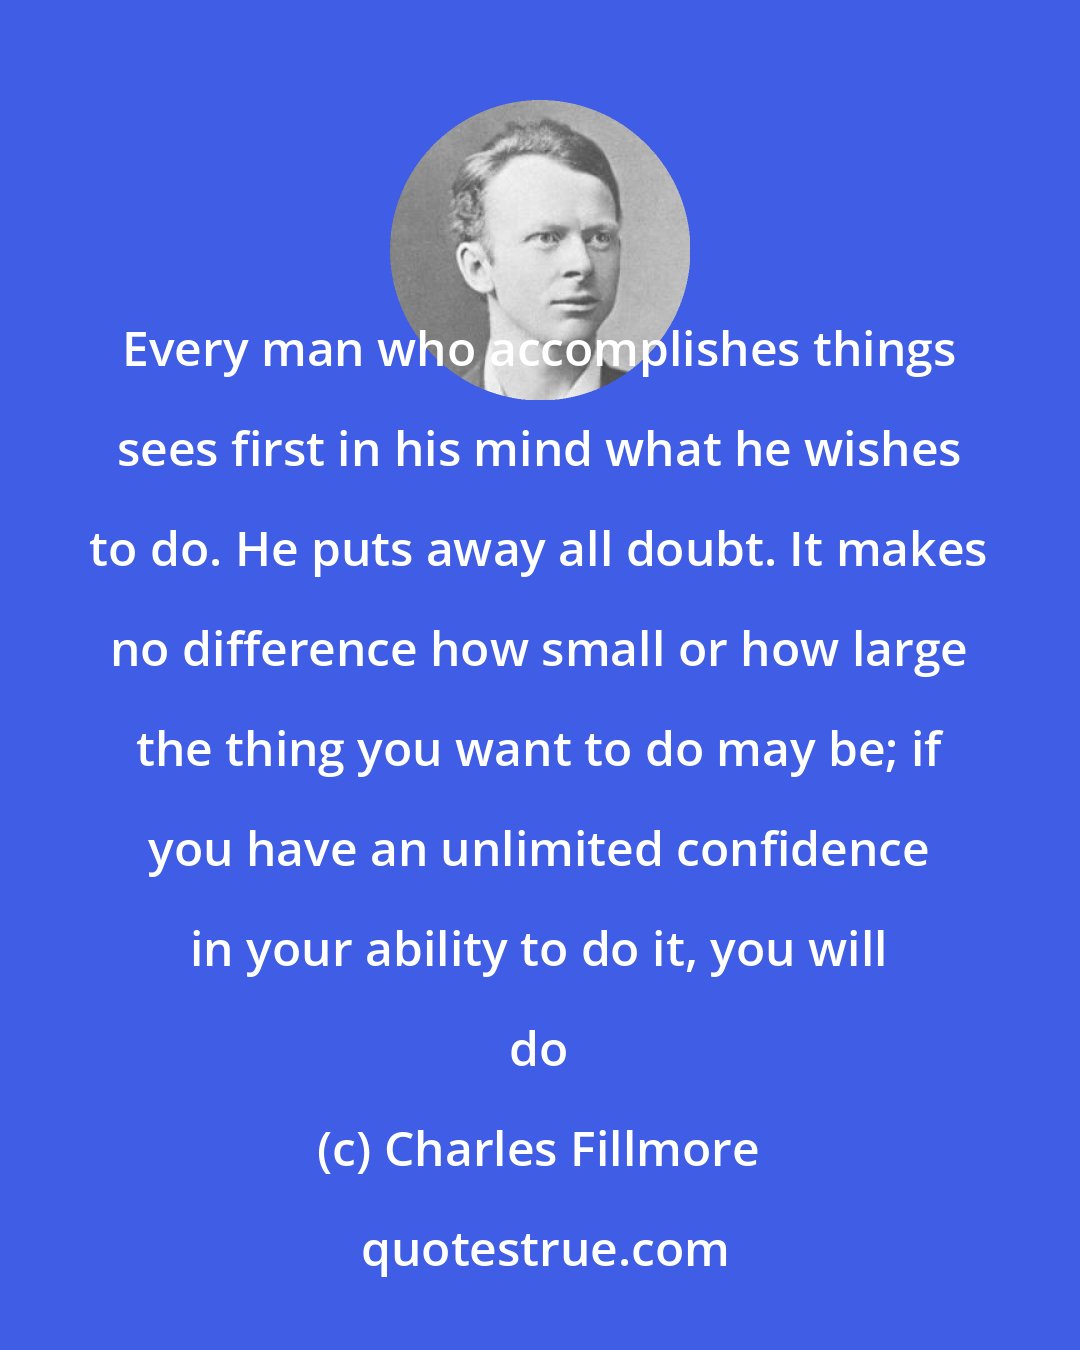 Charles Fillmore: Every man who accomplishes things sees first in his mind what he wishes to do. He puts away all doubt. It makes no difference how small or how large the thing you want to do may be; if you have an unlimited confidence in your ability to do it, you will do